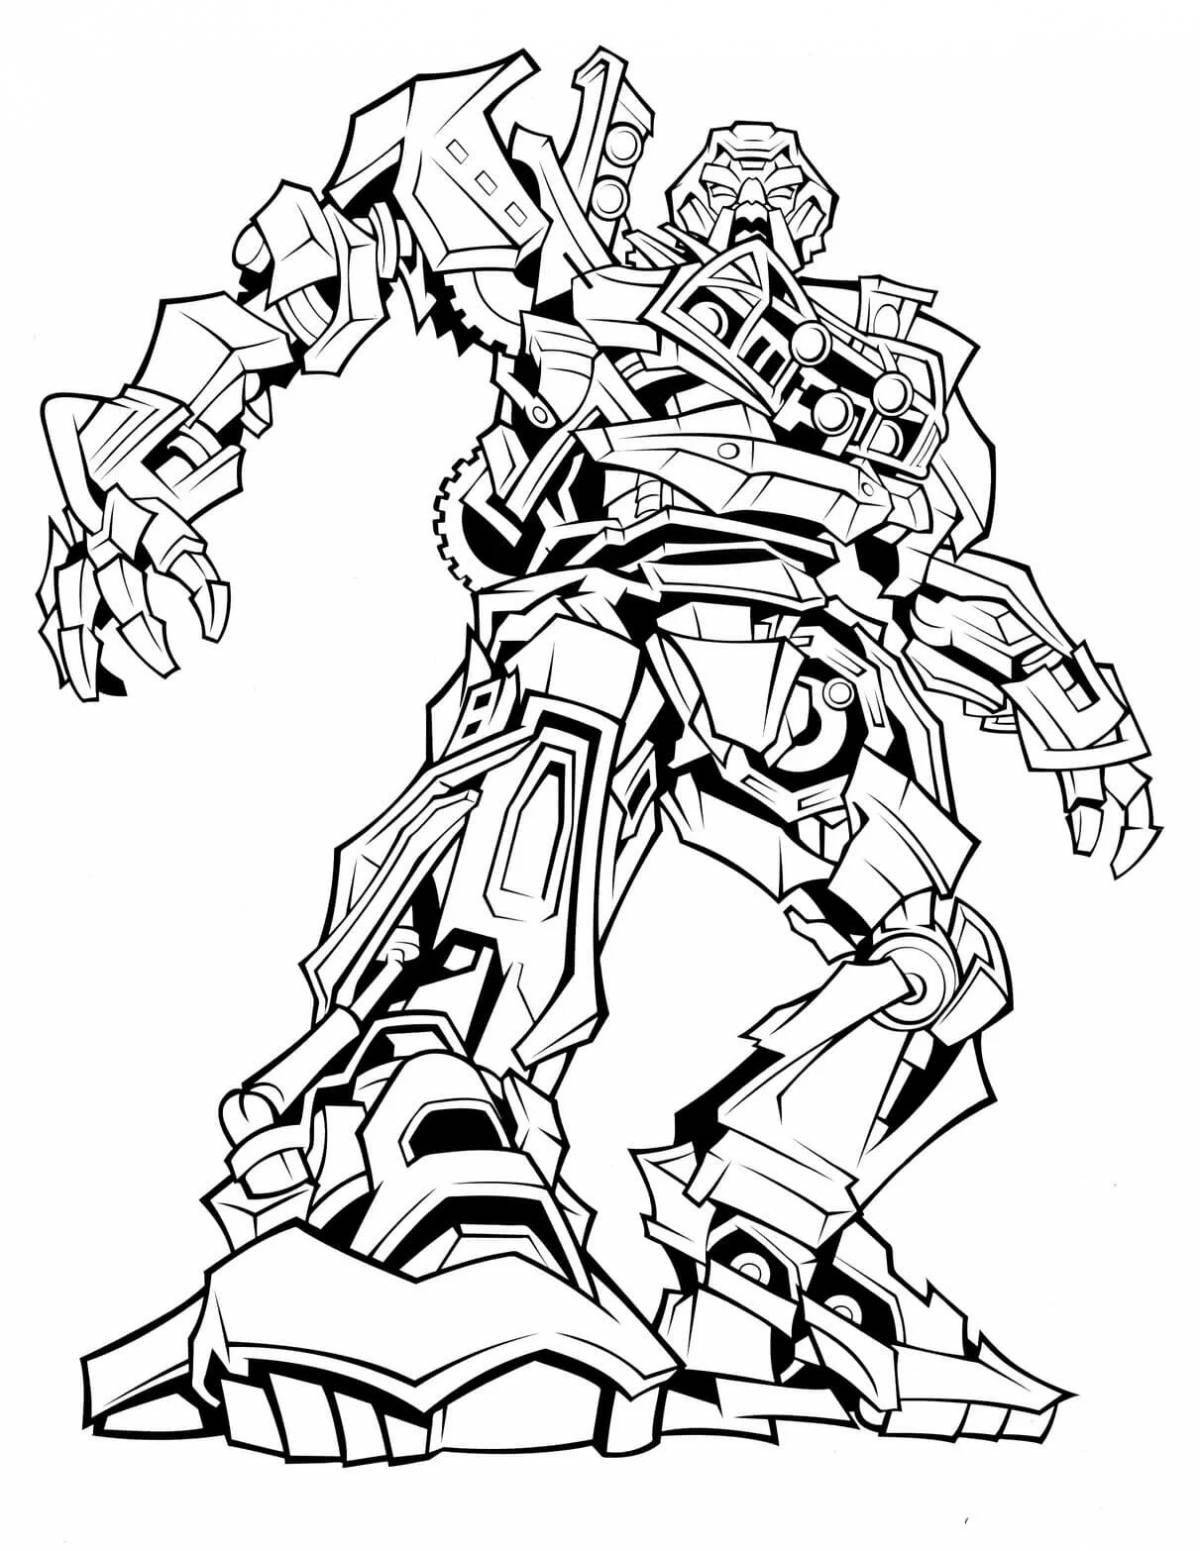 Colorfully drawn megatron coloring page